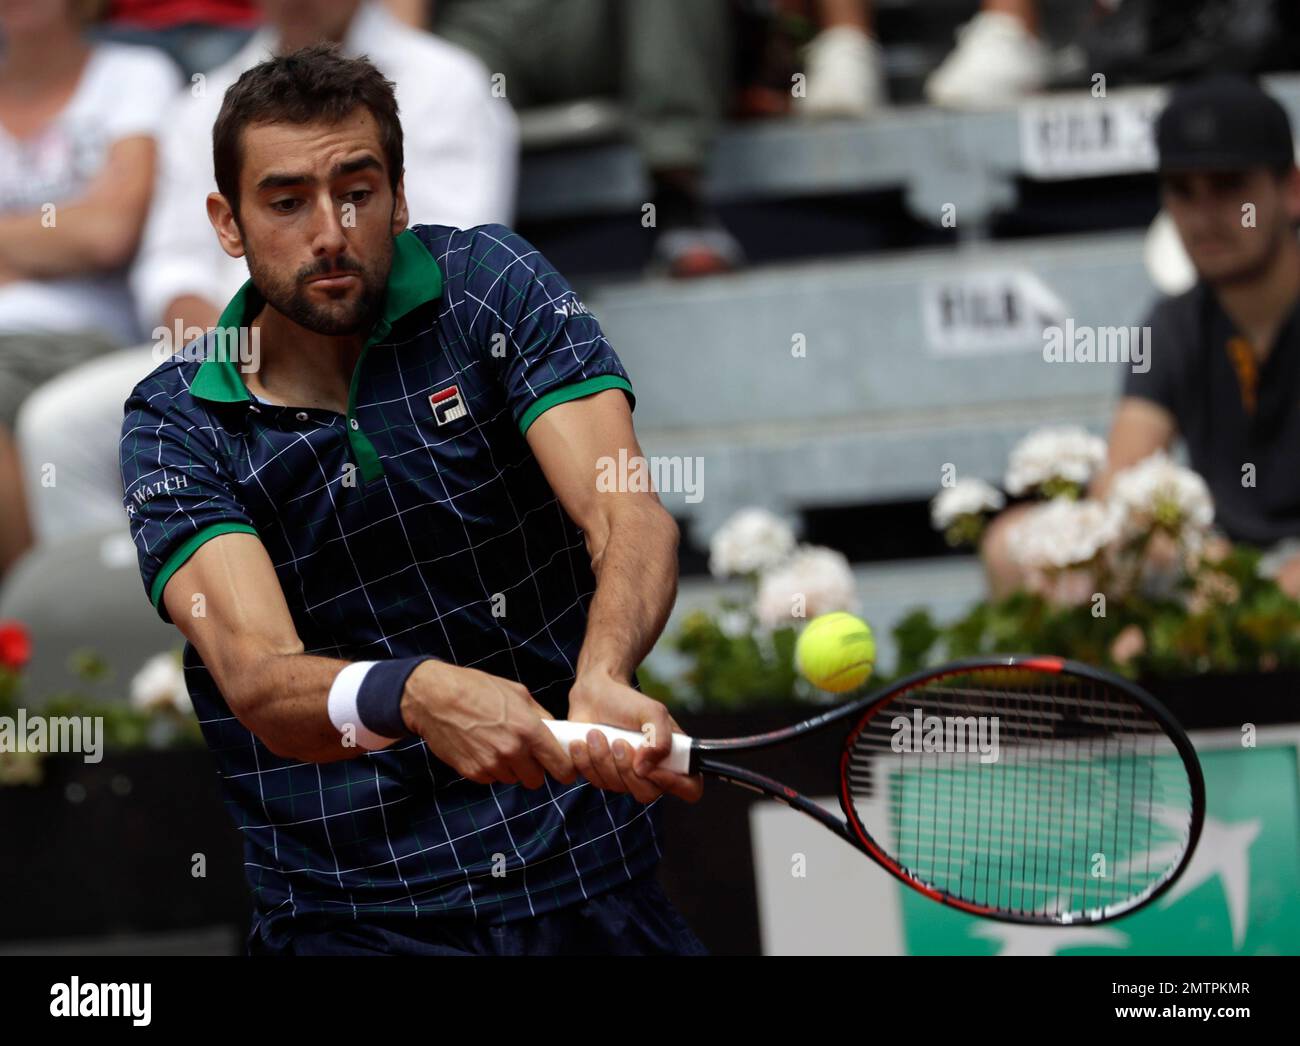 Marin Cilic of Croatia returns the ball to David Goffin of Belgium during the is match at the Italian Open tennis tournament, in Rome, Thursday, May 18, 2017